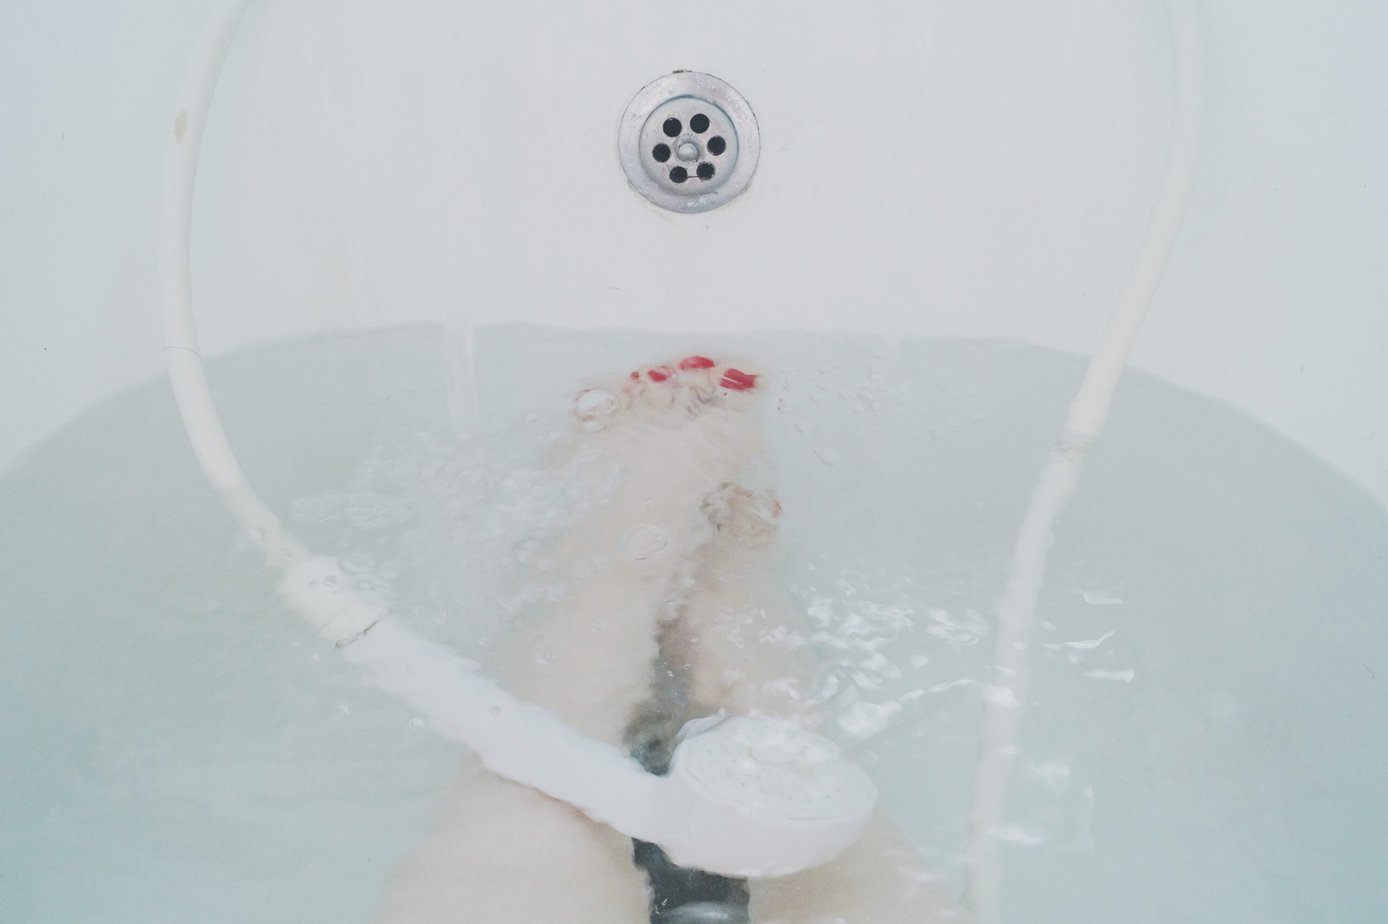 Woman's feet submerged in a bathtub filled with CBD bath soak, offering scents and relaxation.